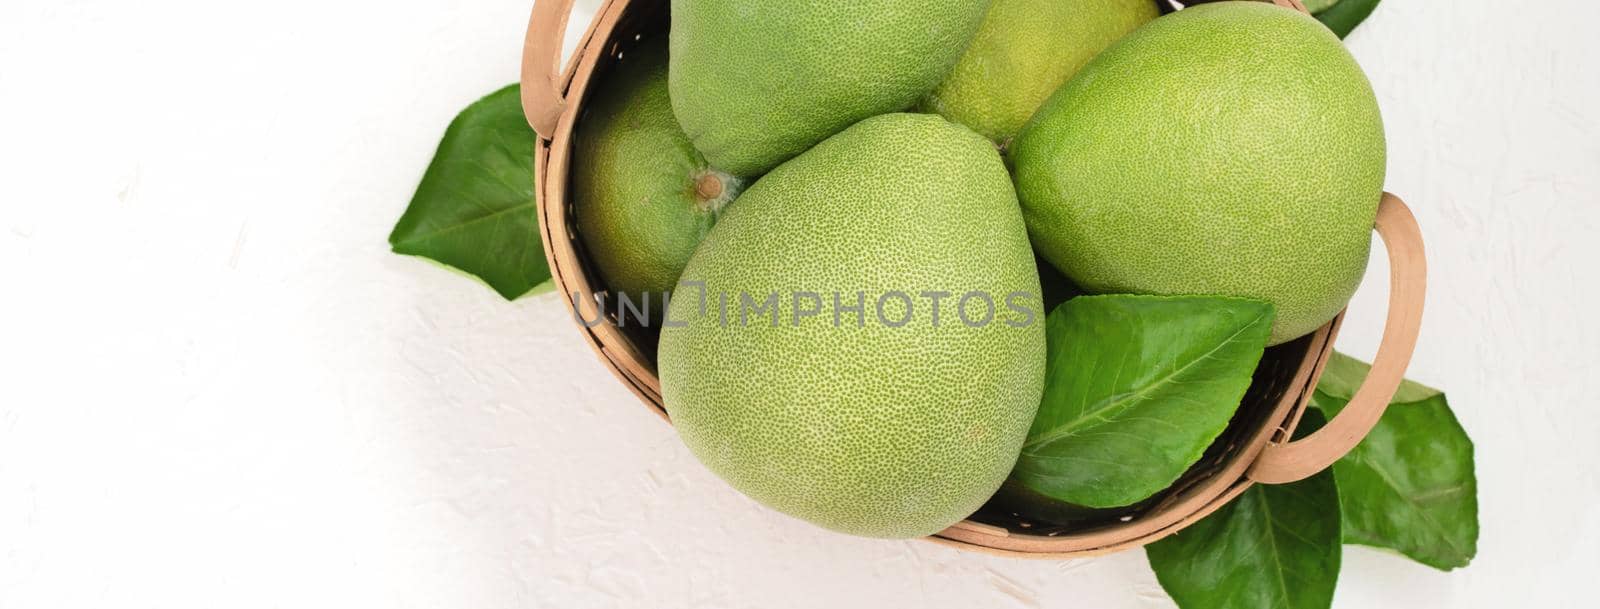 Fresh pomelo, pummelo, grapefruit, shaddock on white cement background in bamboo basket. Autumn seasonal fruit, top view, flat lay, tabletop shot.